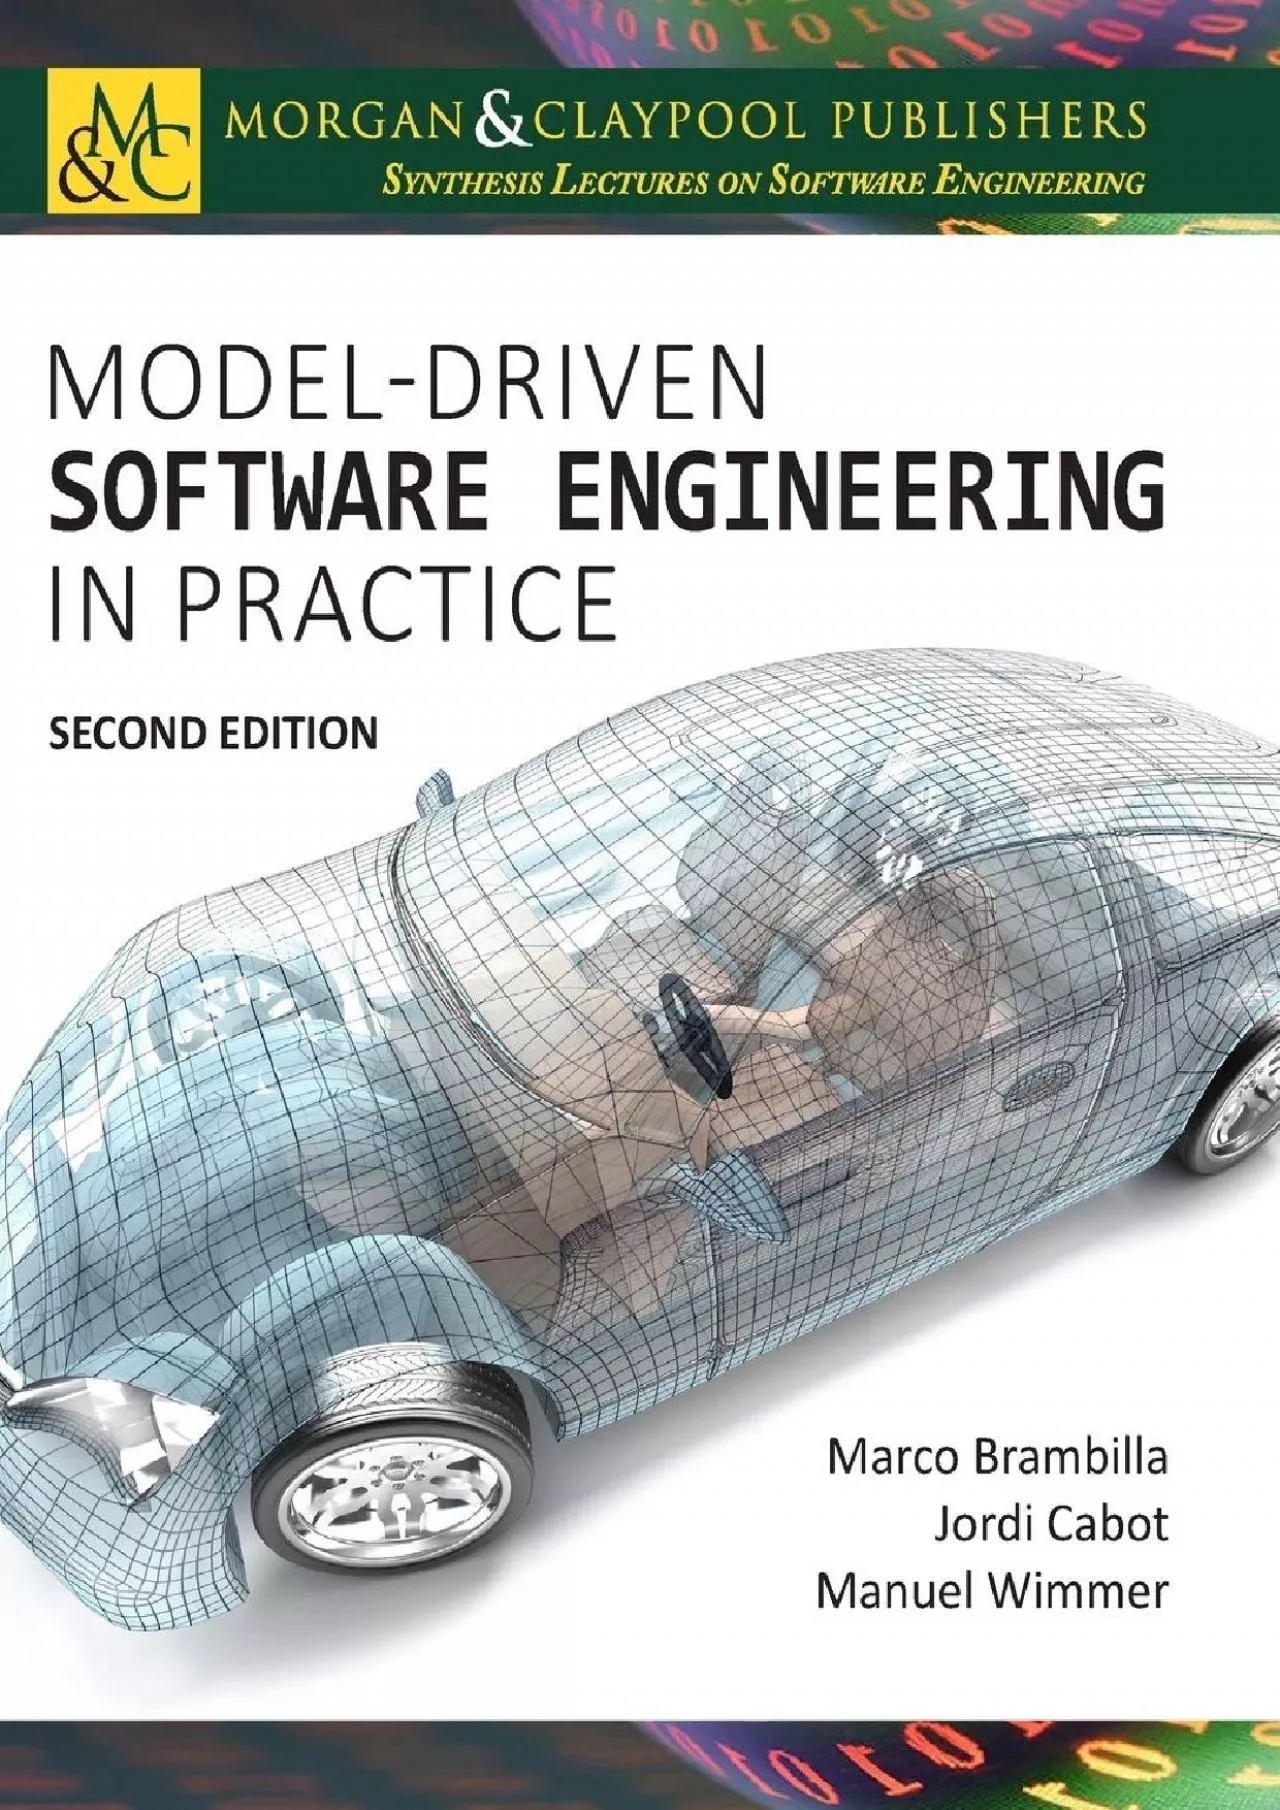 (EBOOK)-Model-Driven Software Engineering in Practice (Synthesis Lectures on Software